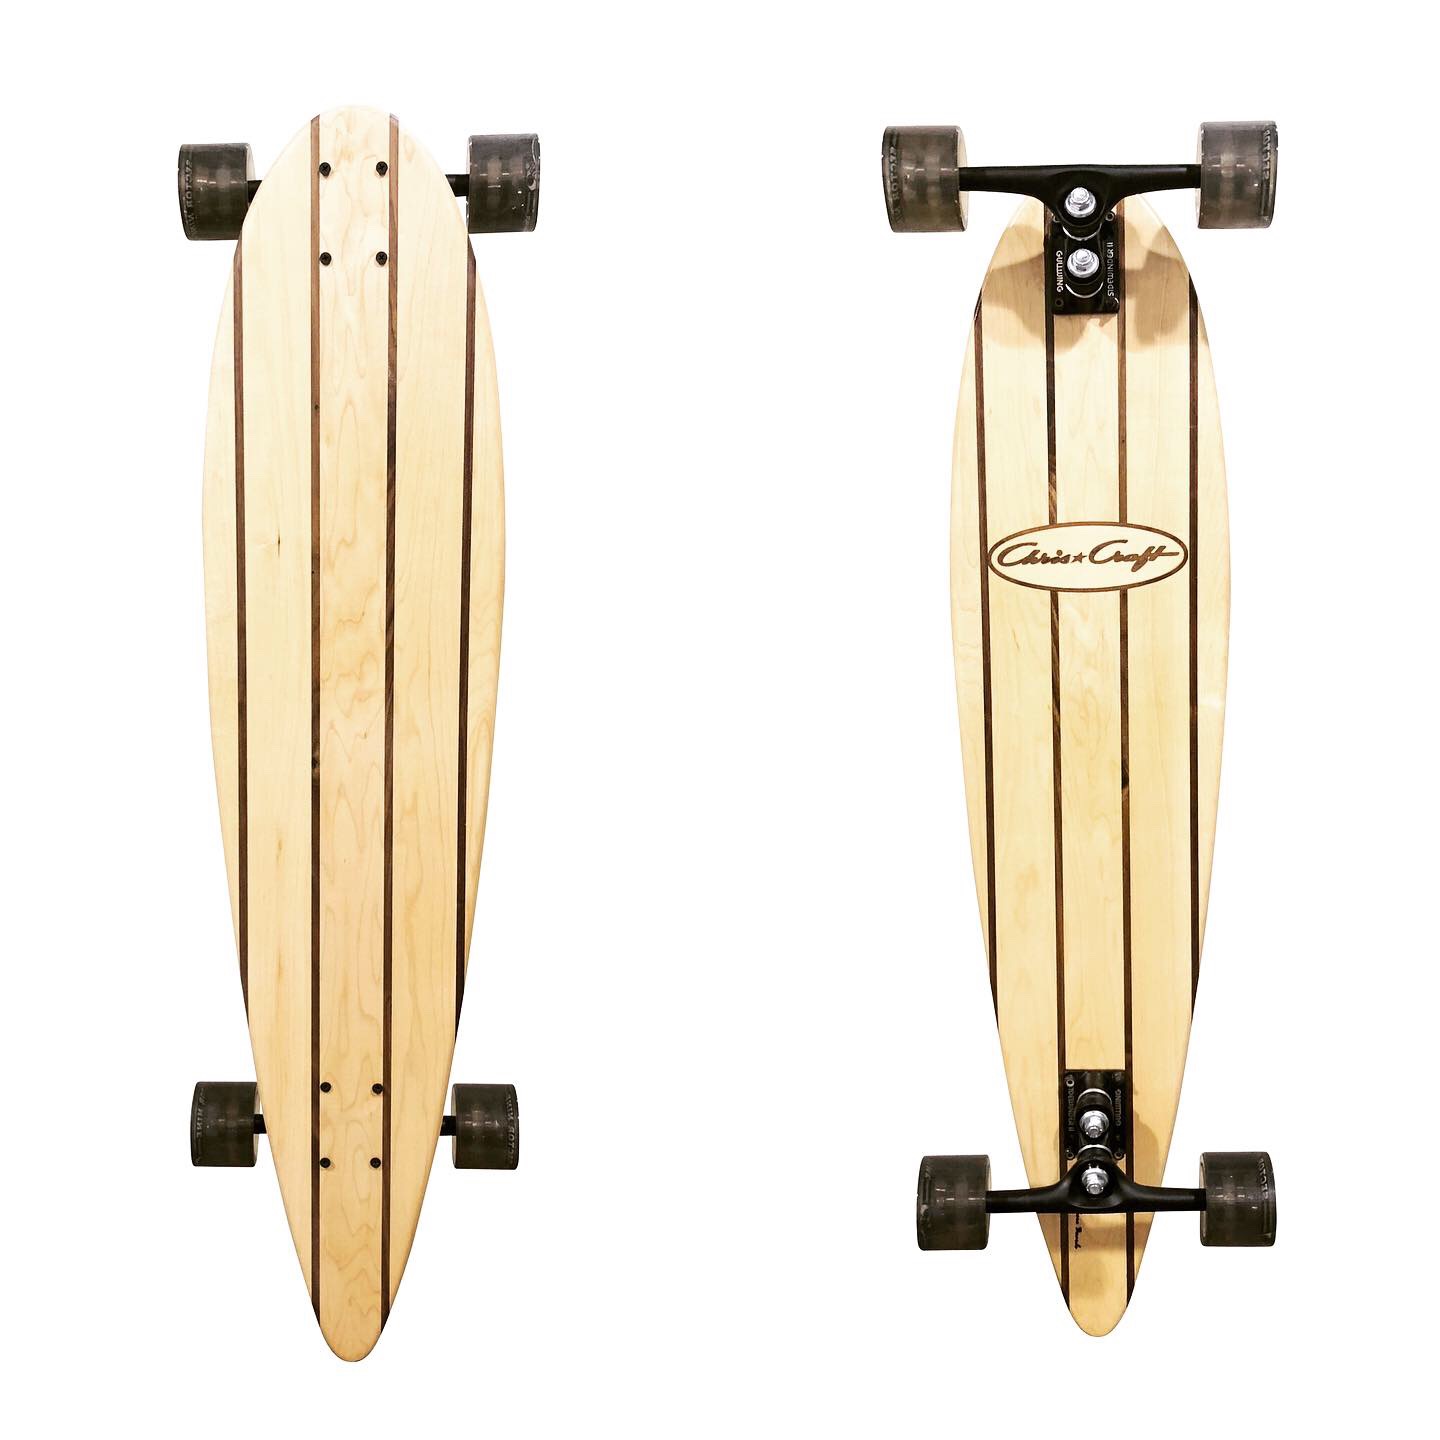 Shore-boards-Longboard-Chris-Craft-Pintail